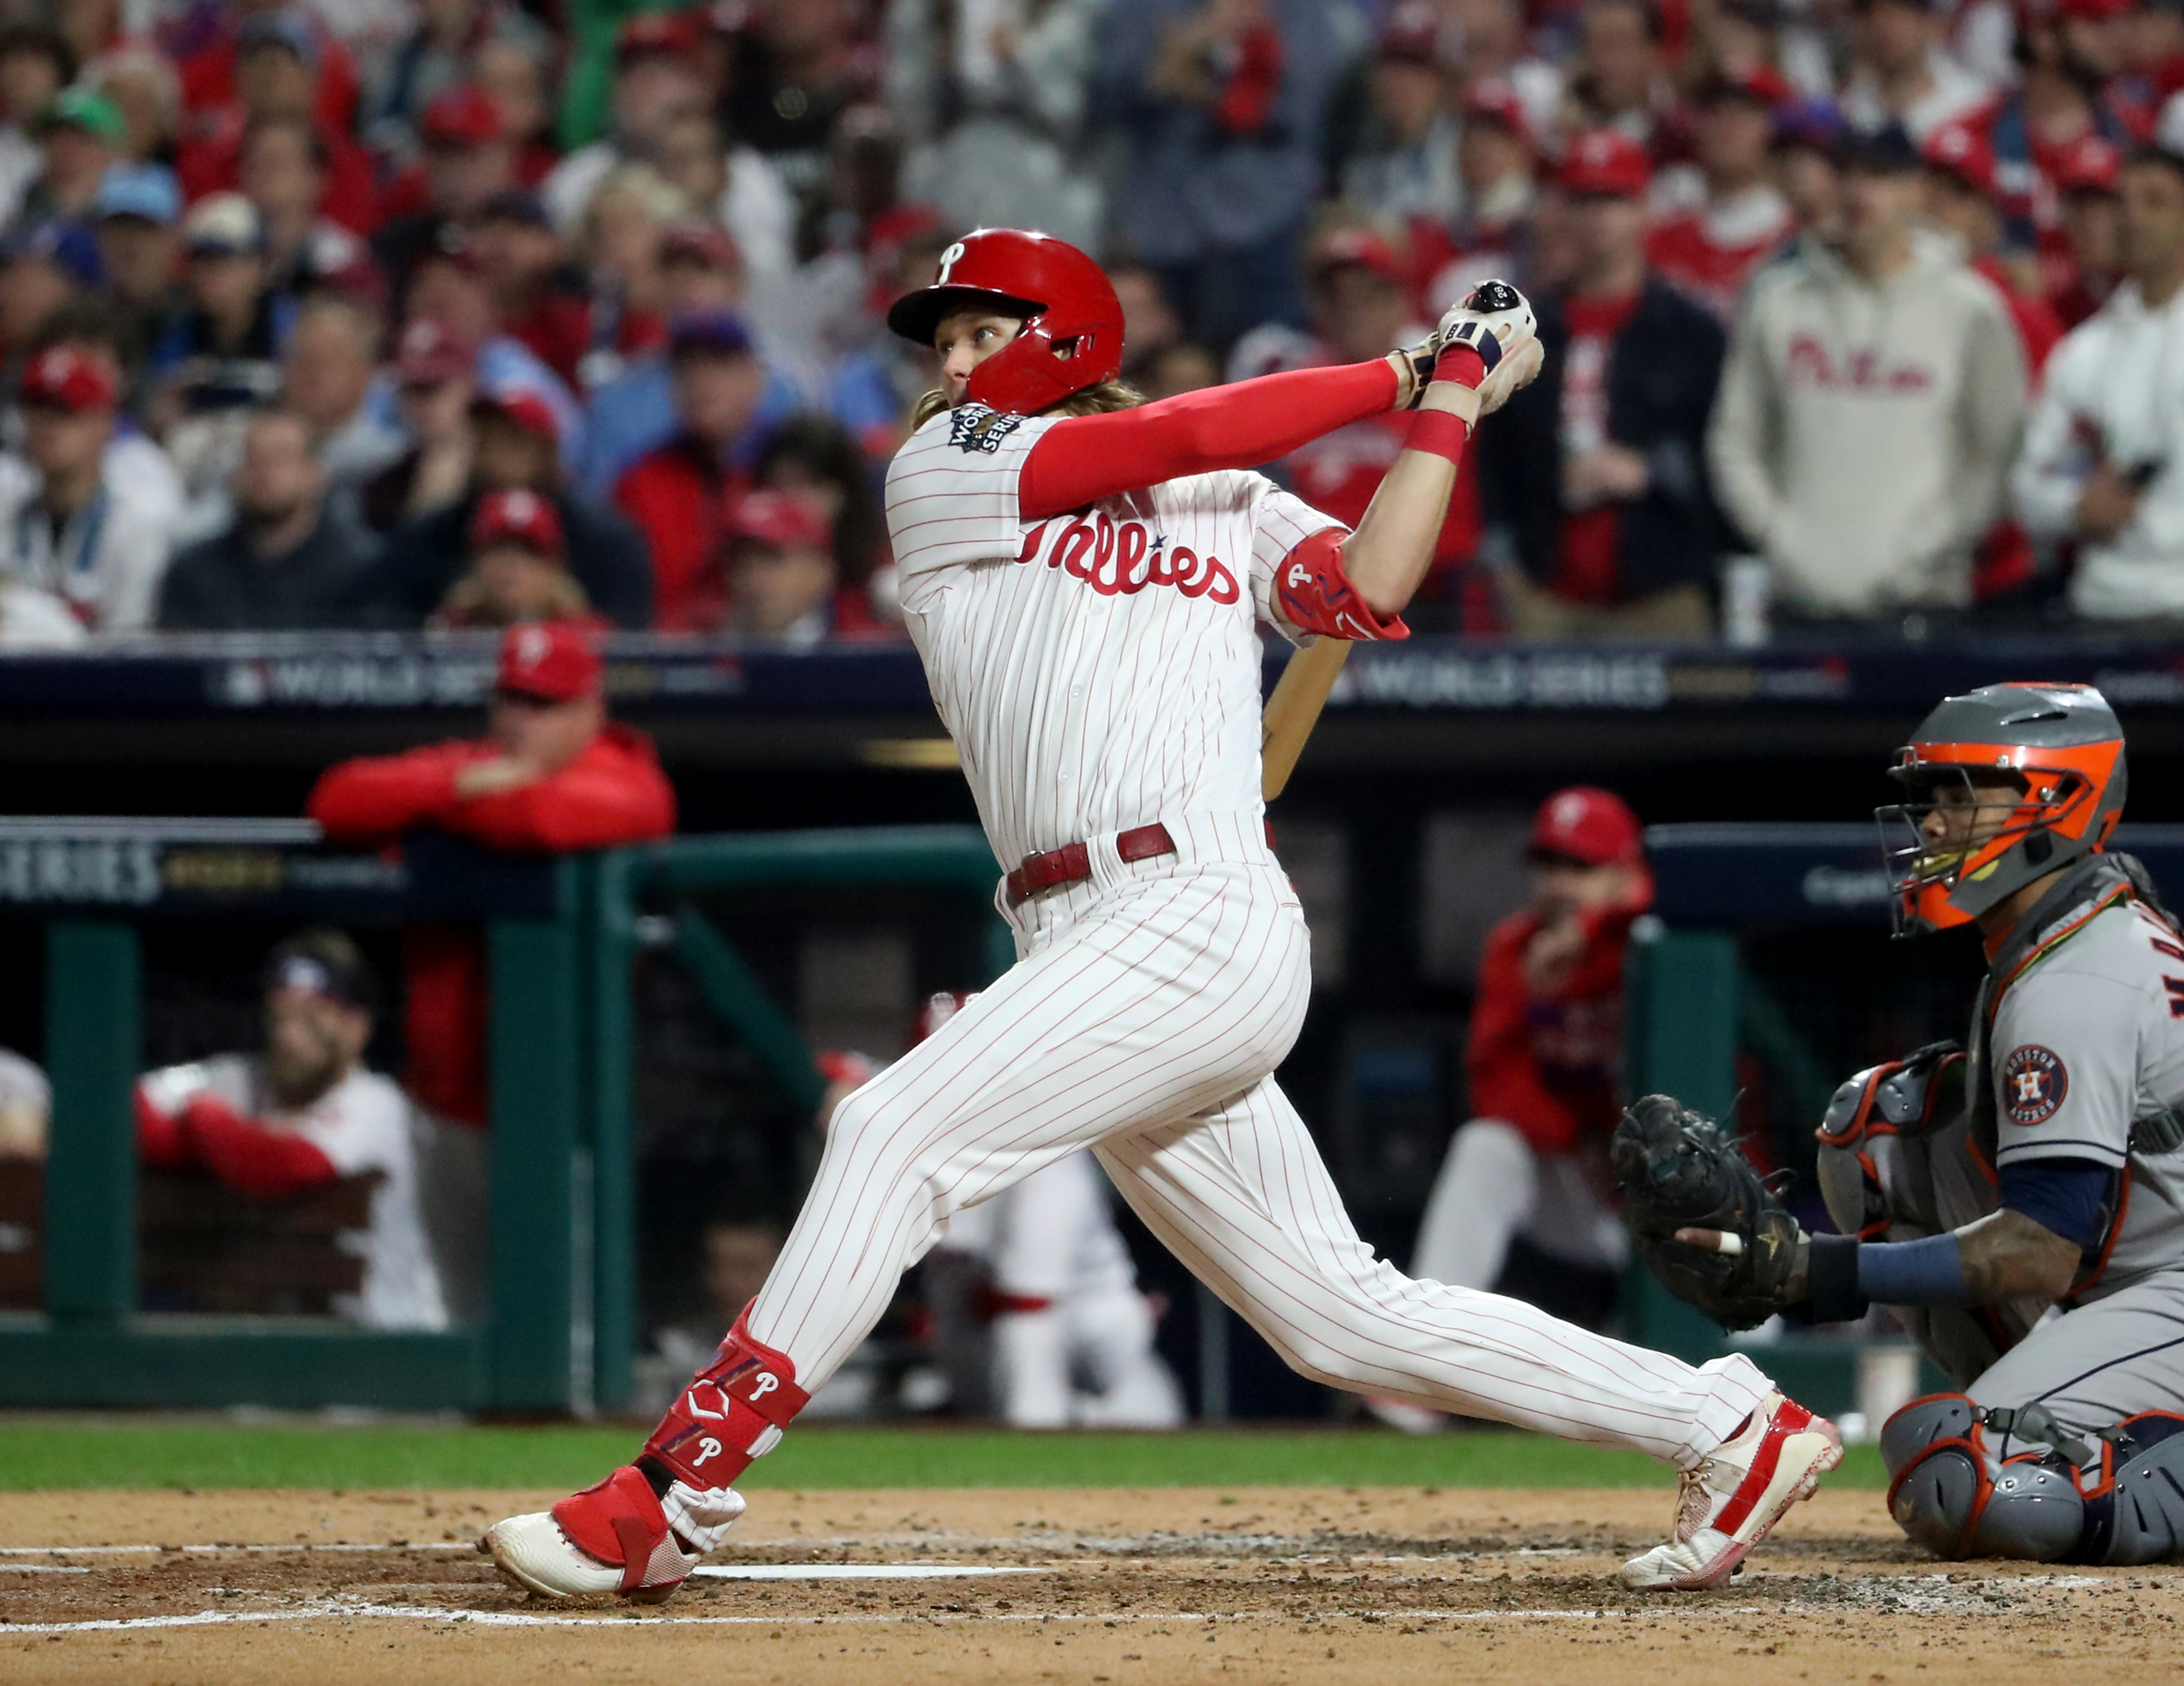 Alec Bohm (28) of the Philadelphia Phillies hits a home run in the second inning during World Series Game 3 against the Houston Astros at Citizens Bank Park, Tuesday, Nov. 1, 2022. The home run gave the Phillies a 3-0 lead.